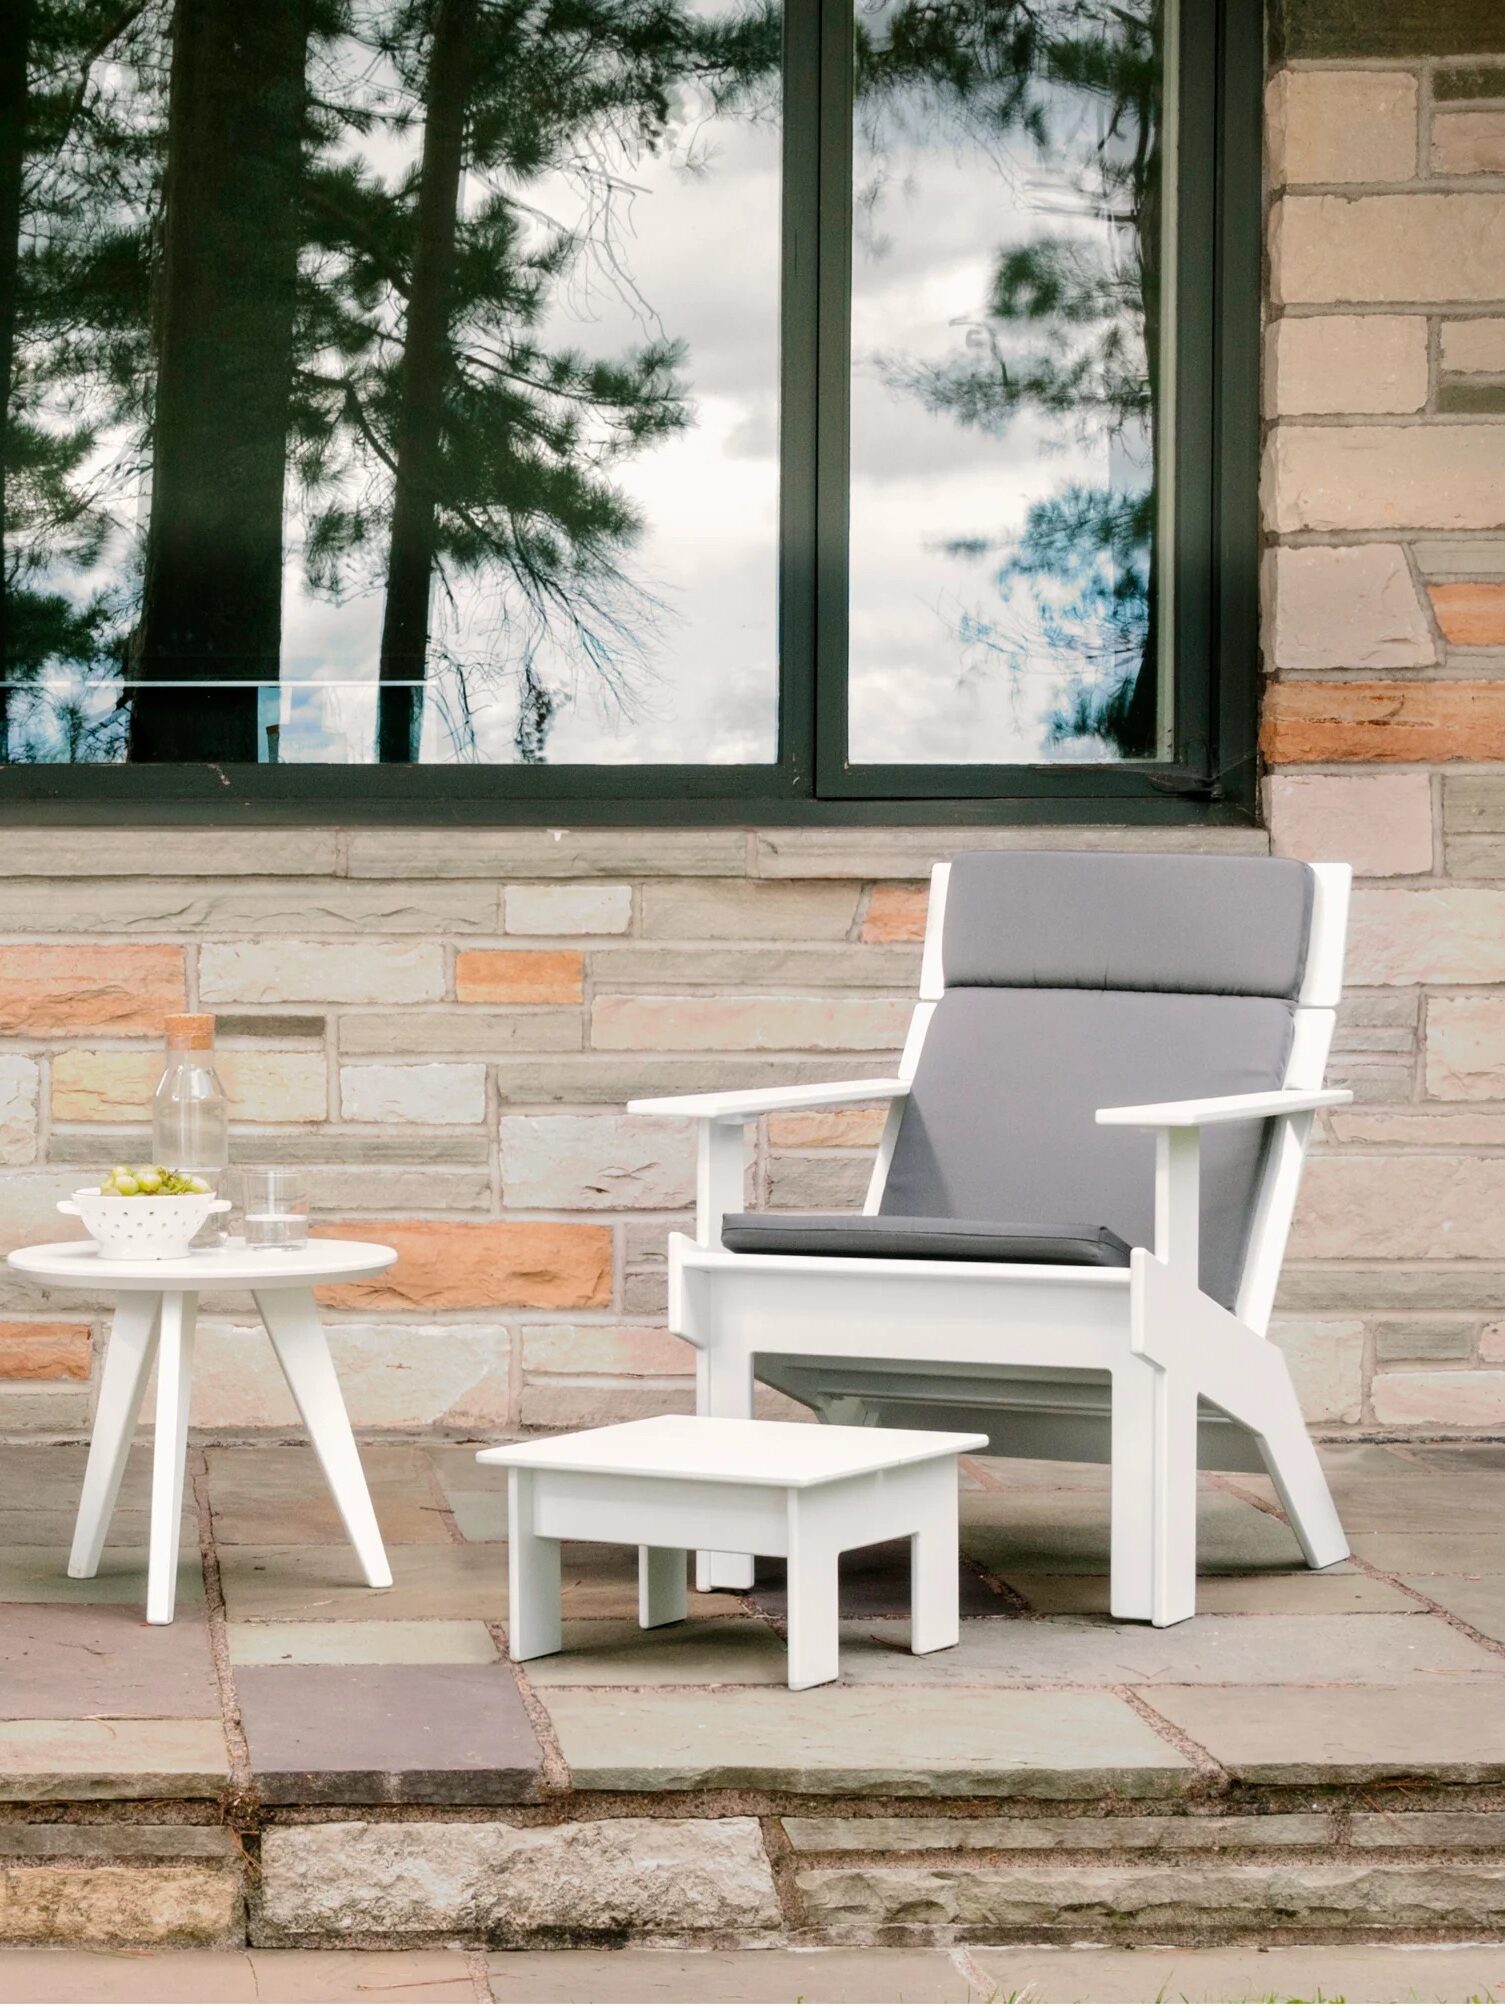 A grey lounge chair and white side table from Loll Designs in an outdoor patio setting.